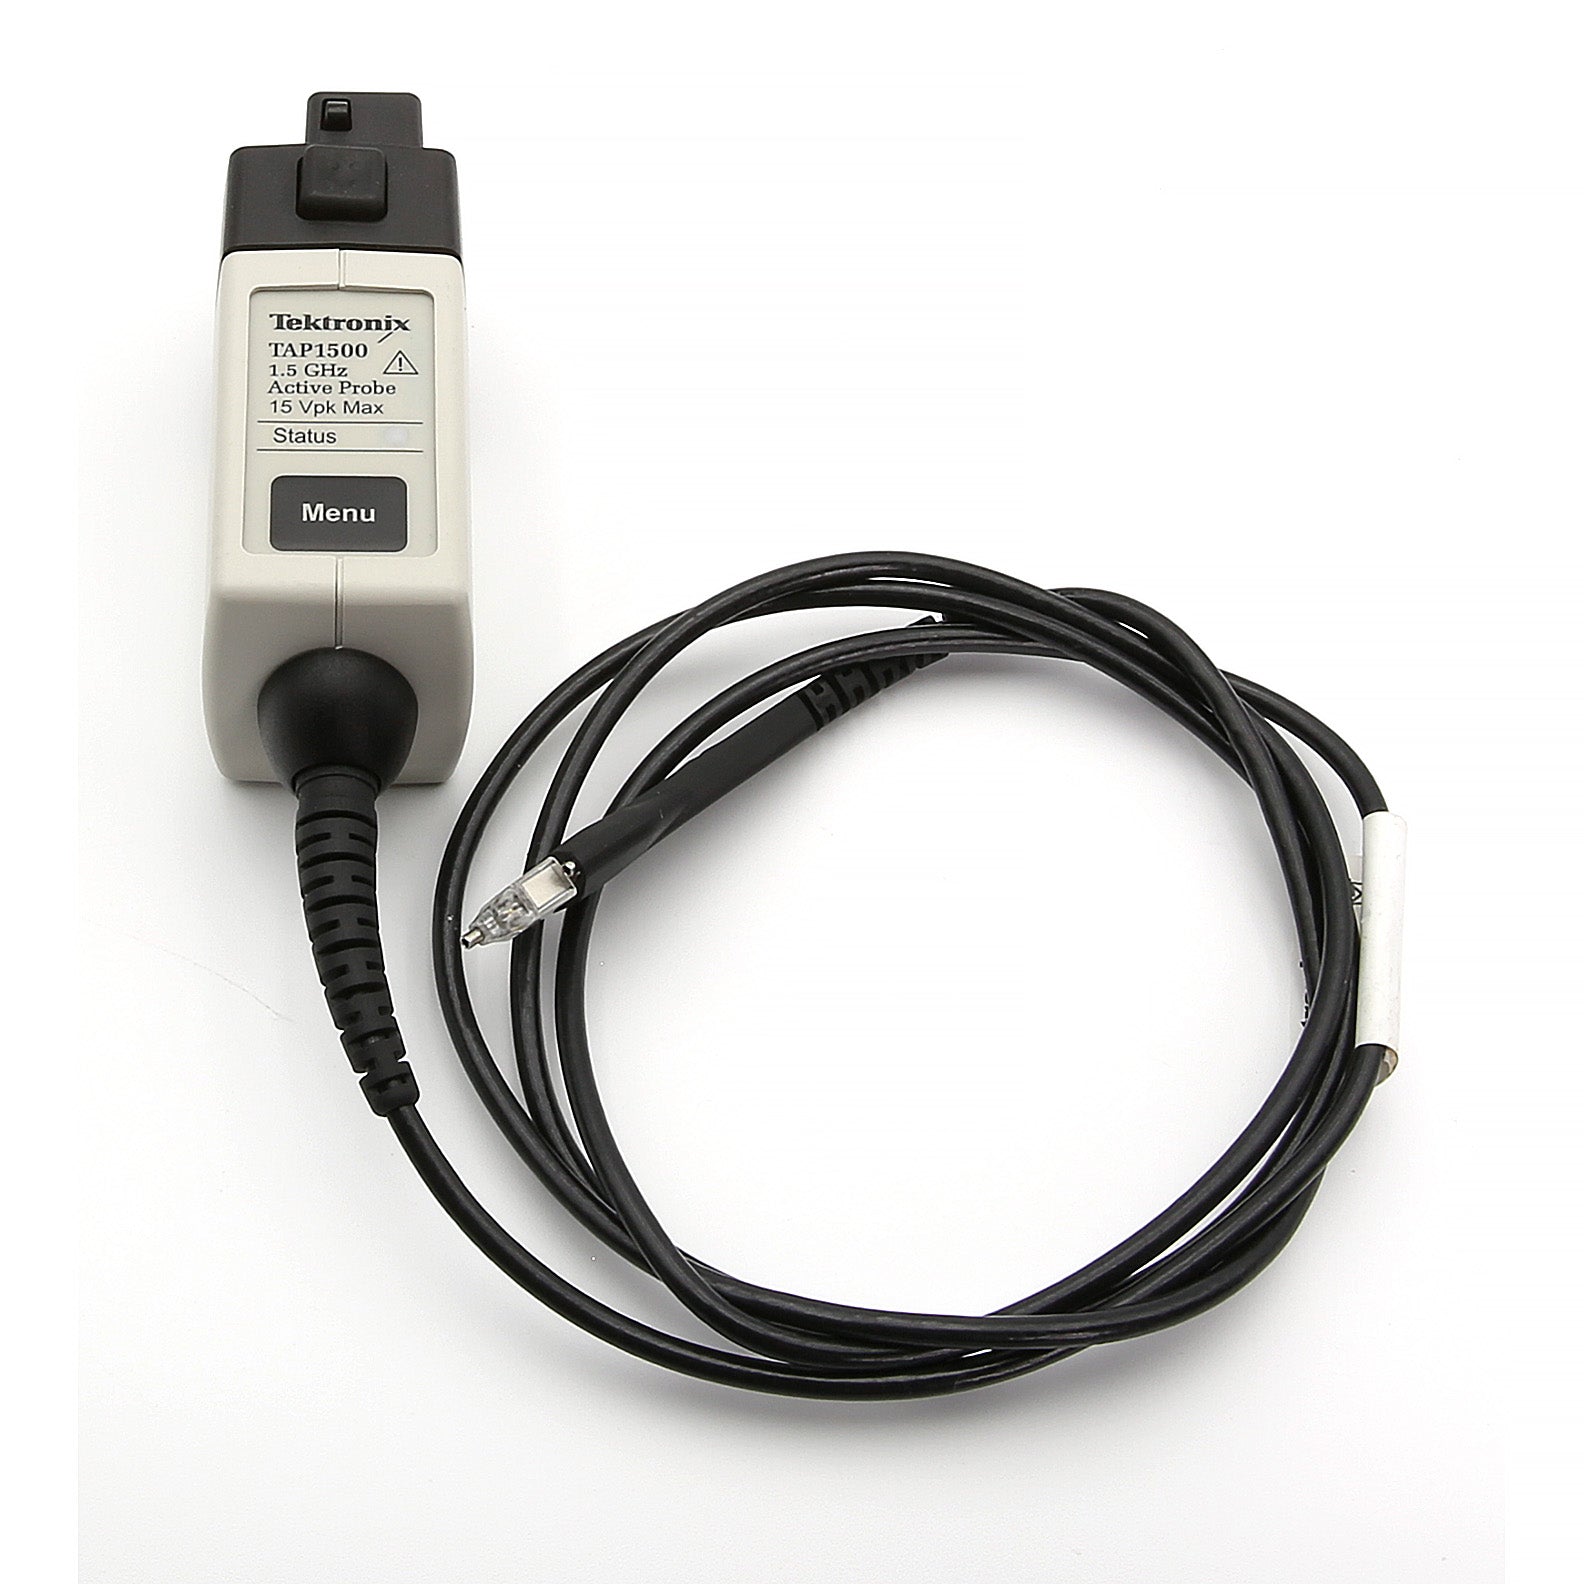 Tektronix TAP1500 1.5 GHz Active Probe, Single-Ended, with VPI Interface